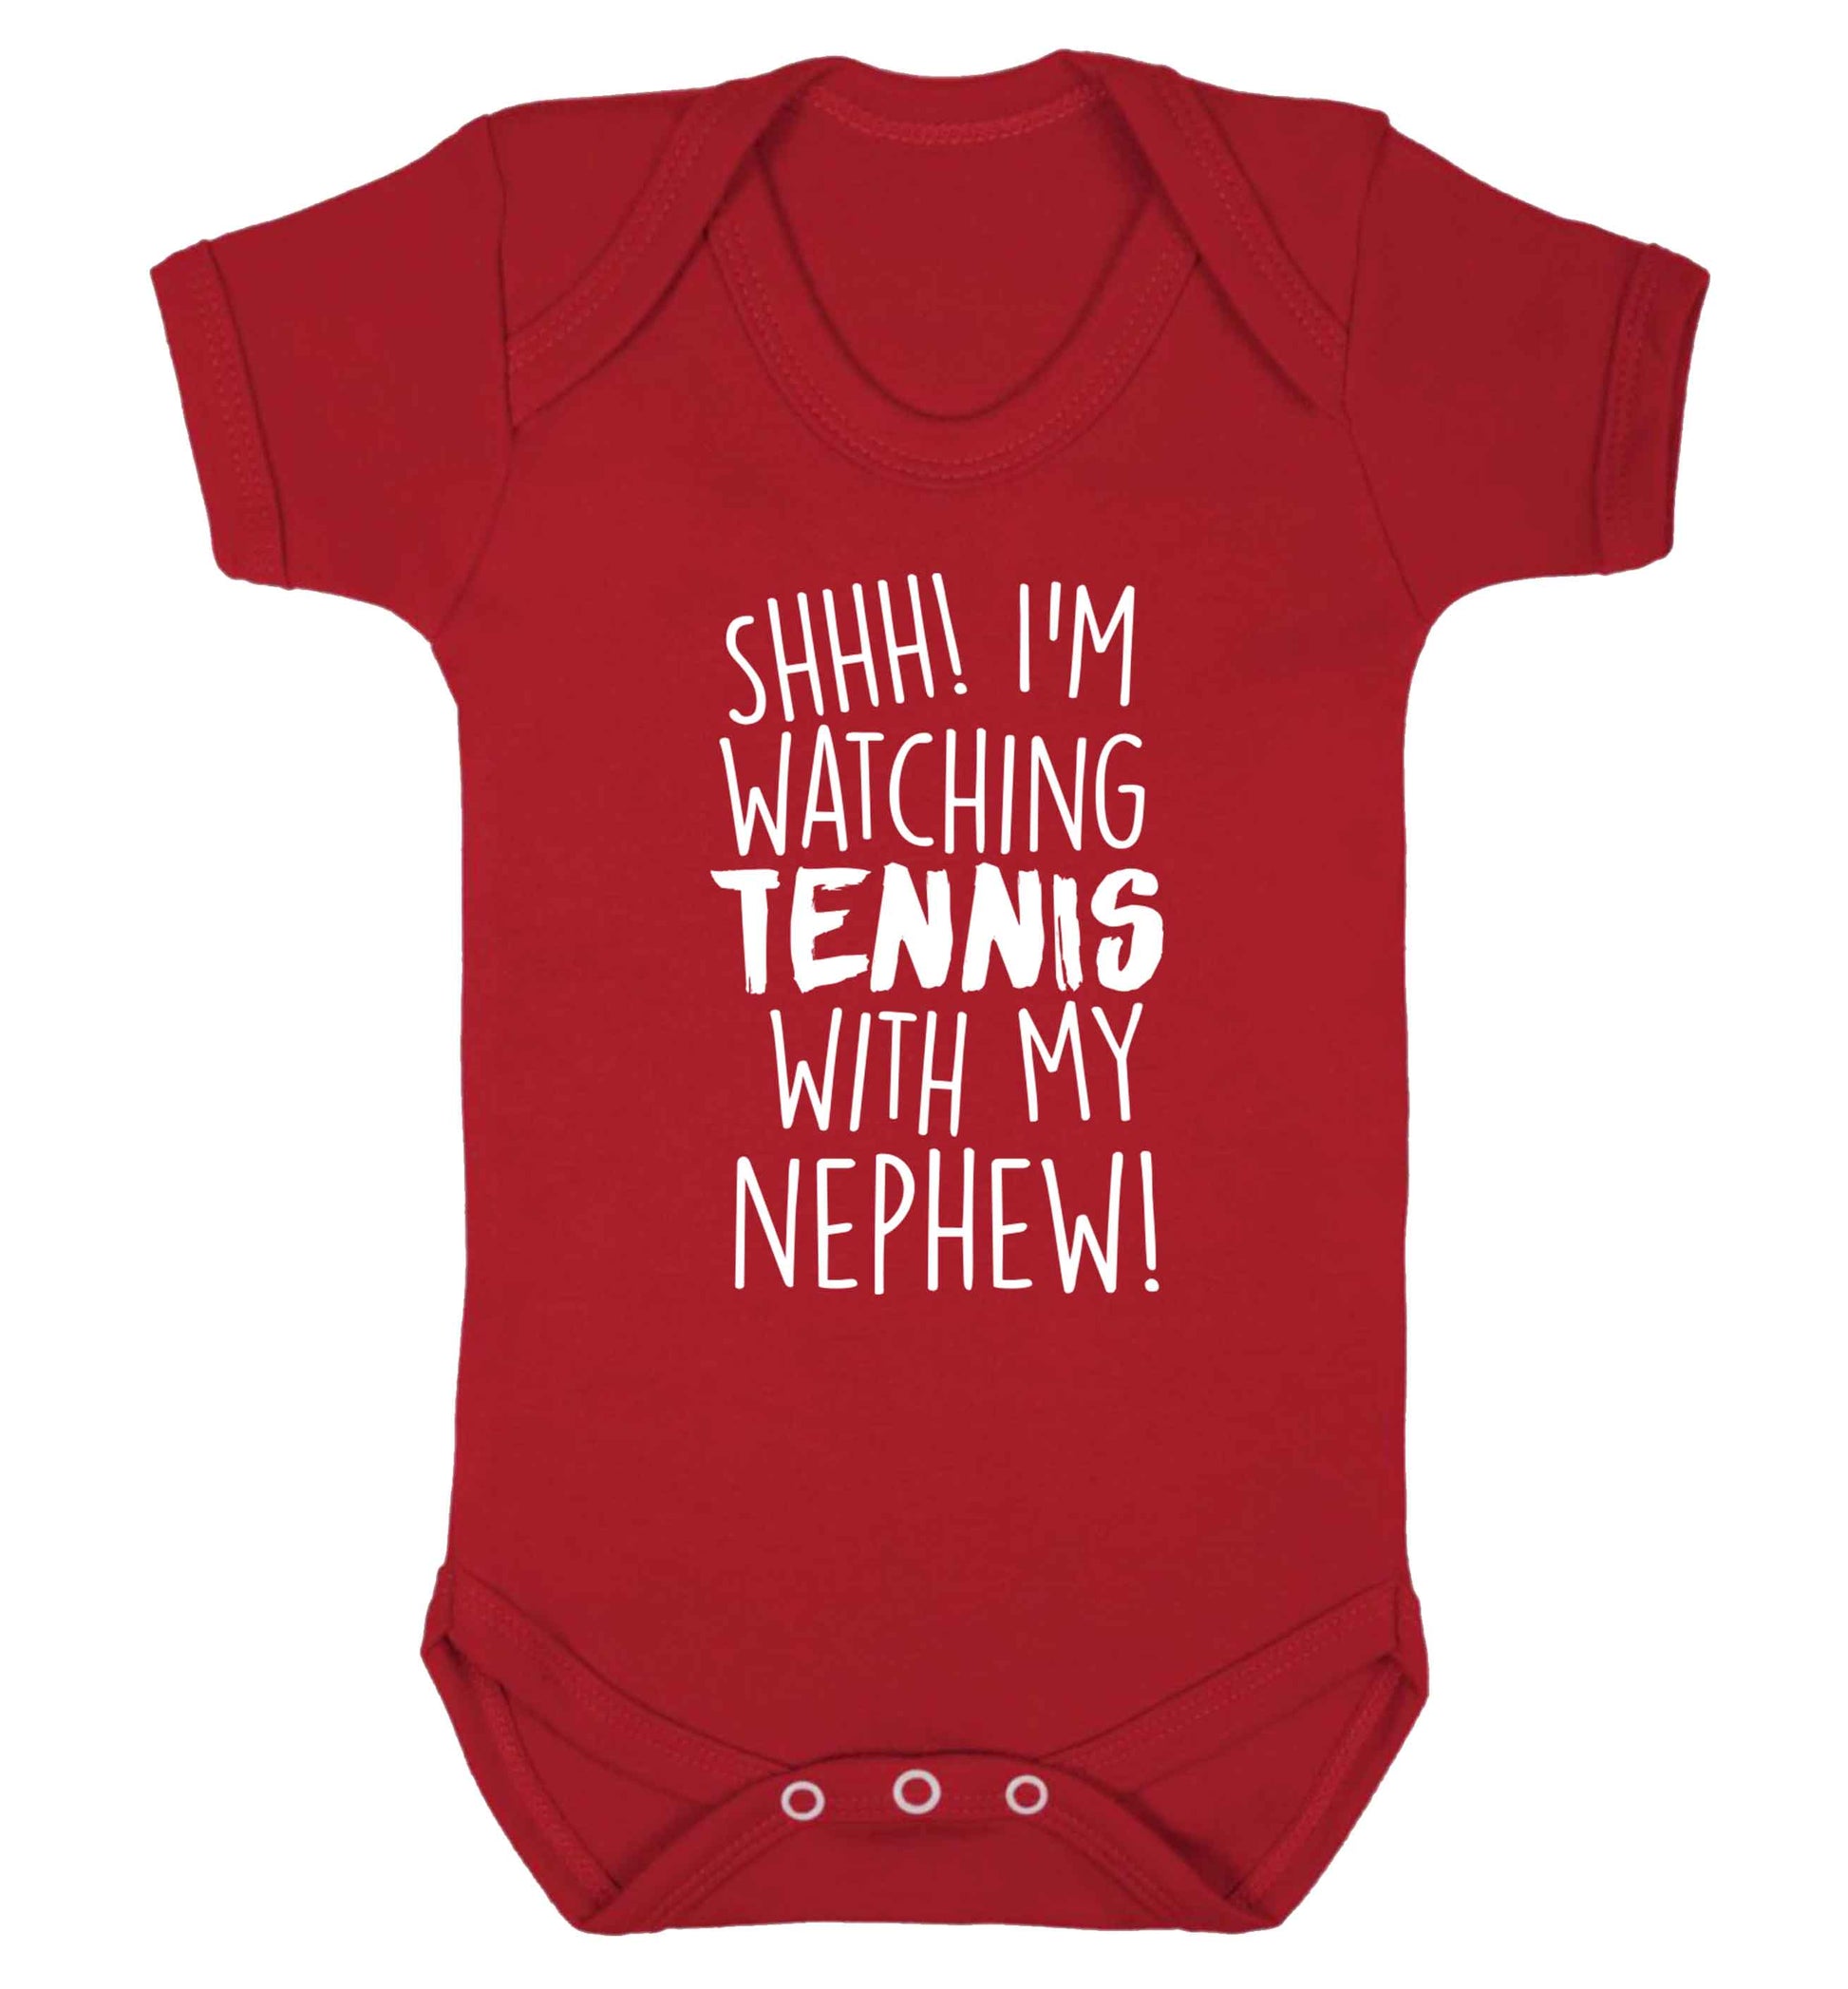 Shh! I'm watching tennis with my nephew! Baby Vest red 18-24 months